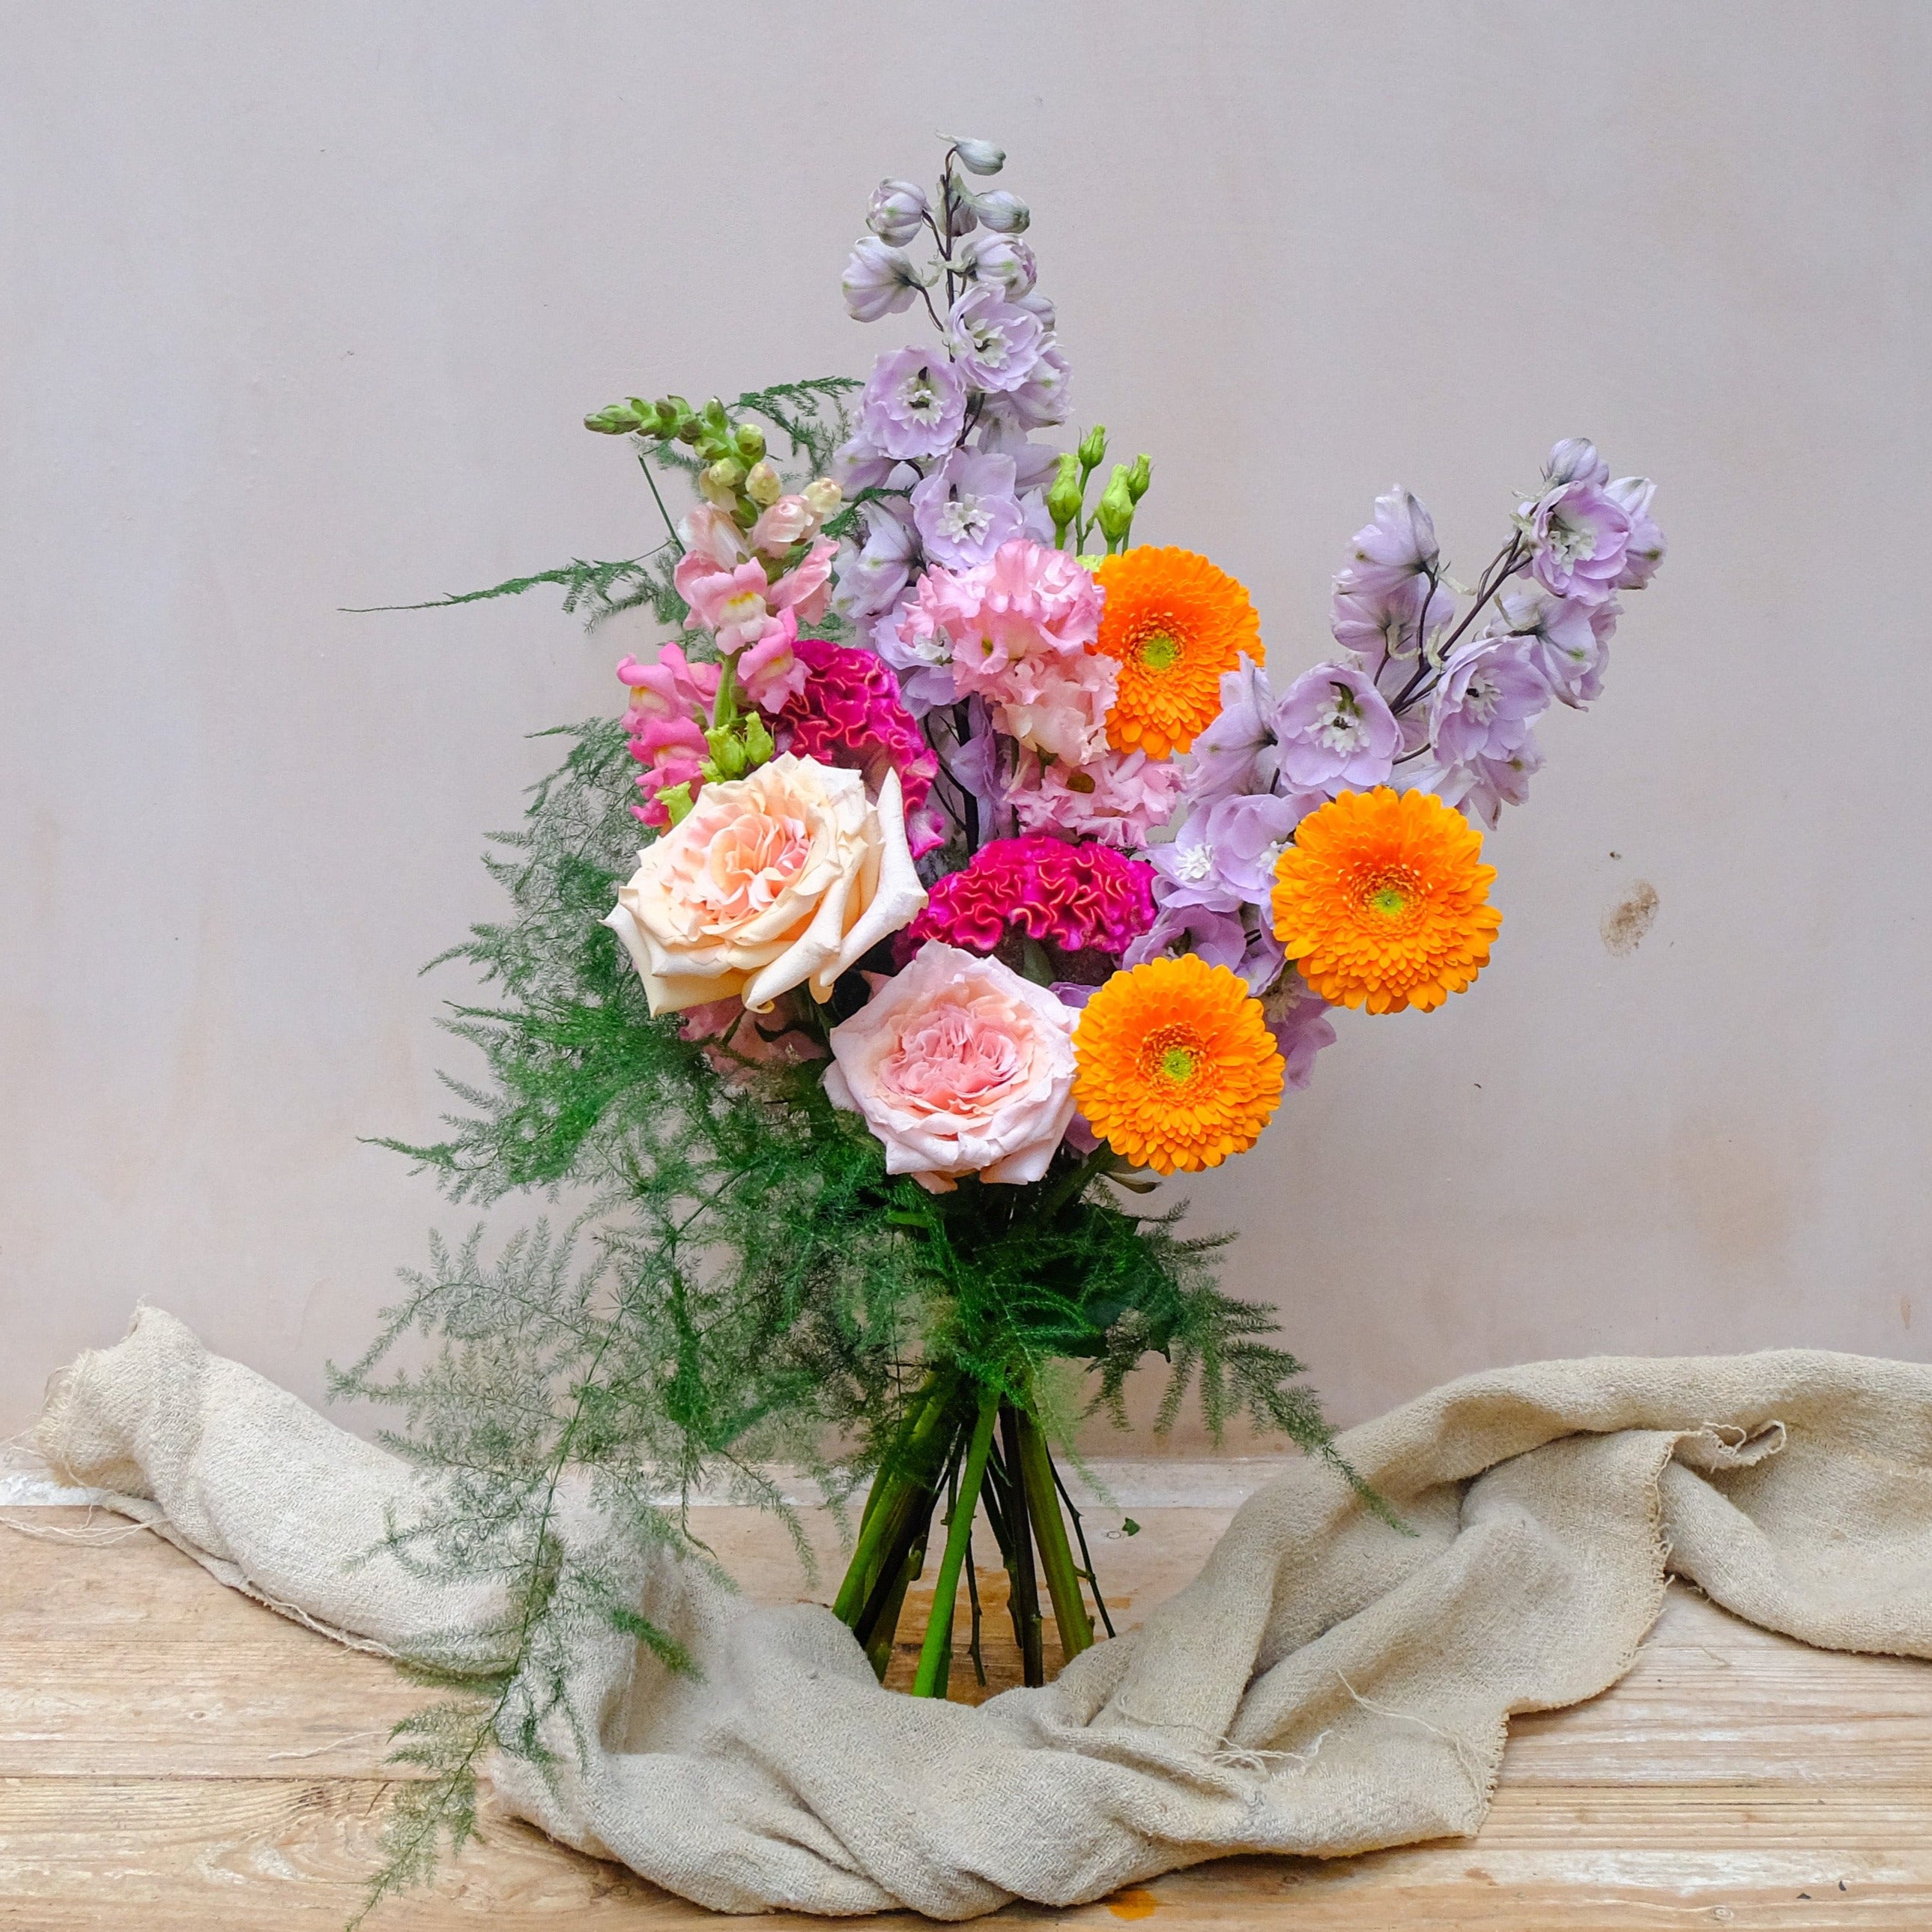 Colourful fresh flowers bouquet with purple delphinium, orange gerbera and ppink snadragon